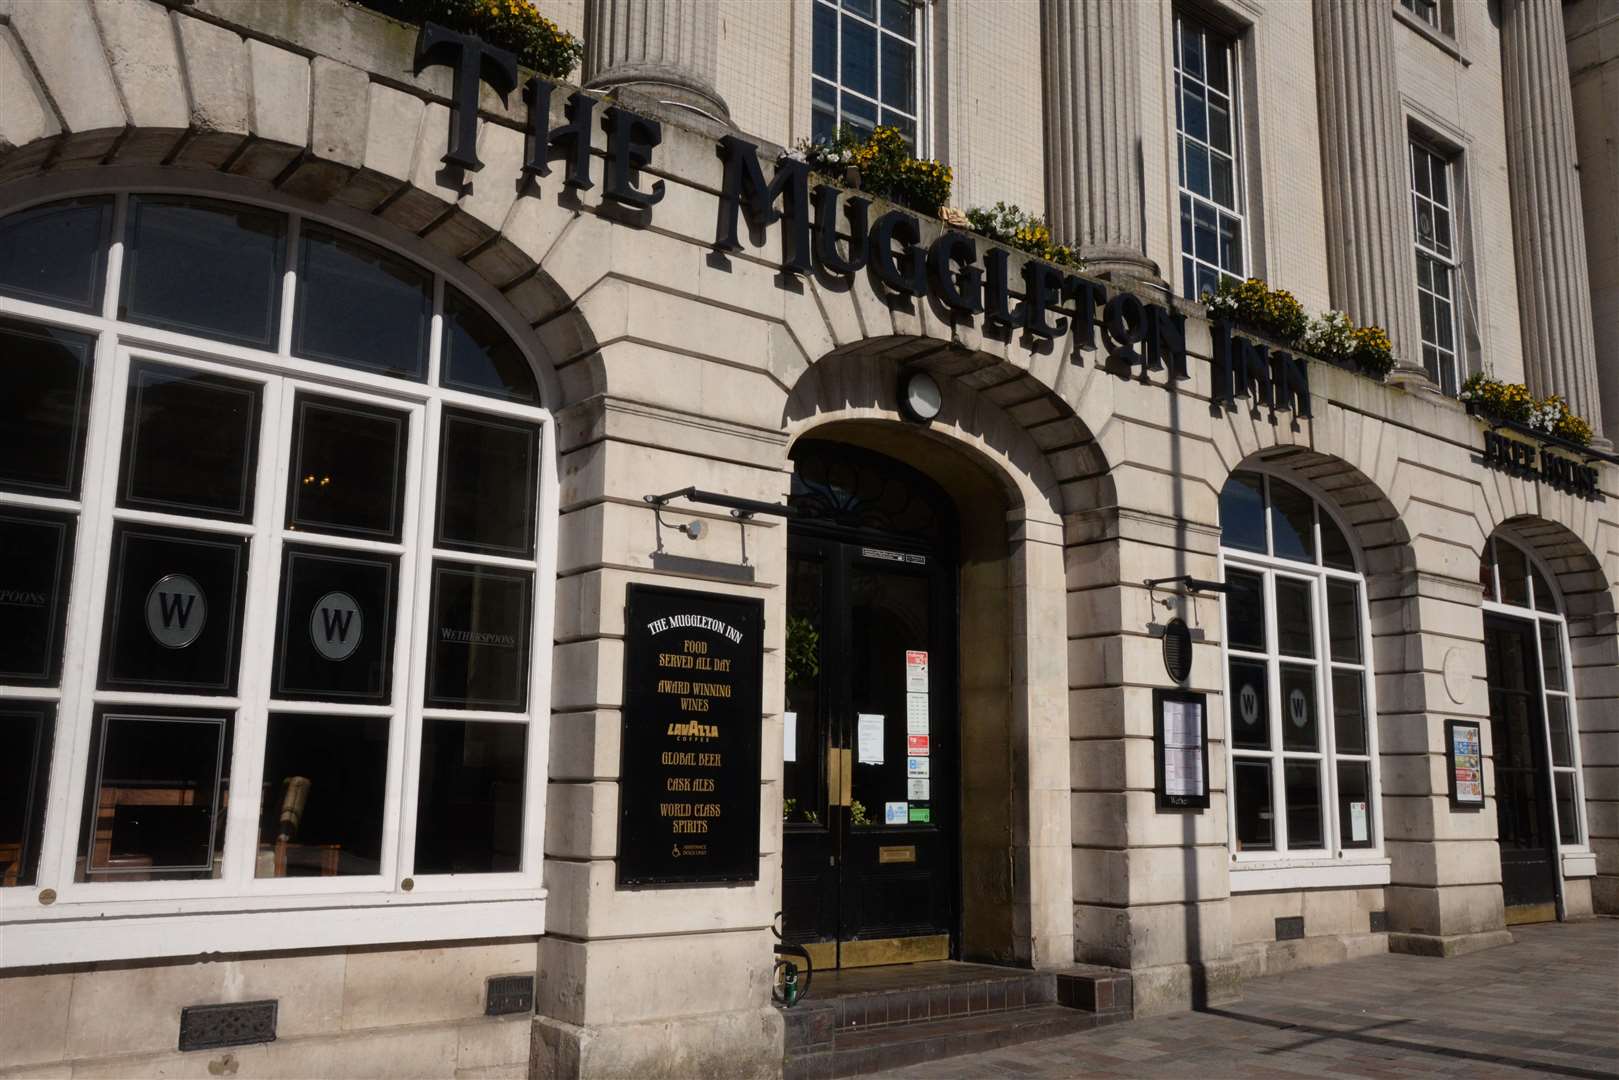 The Muggleton Inn in Maidstone takes its named from one of Dickens' tales